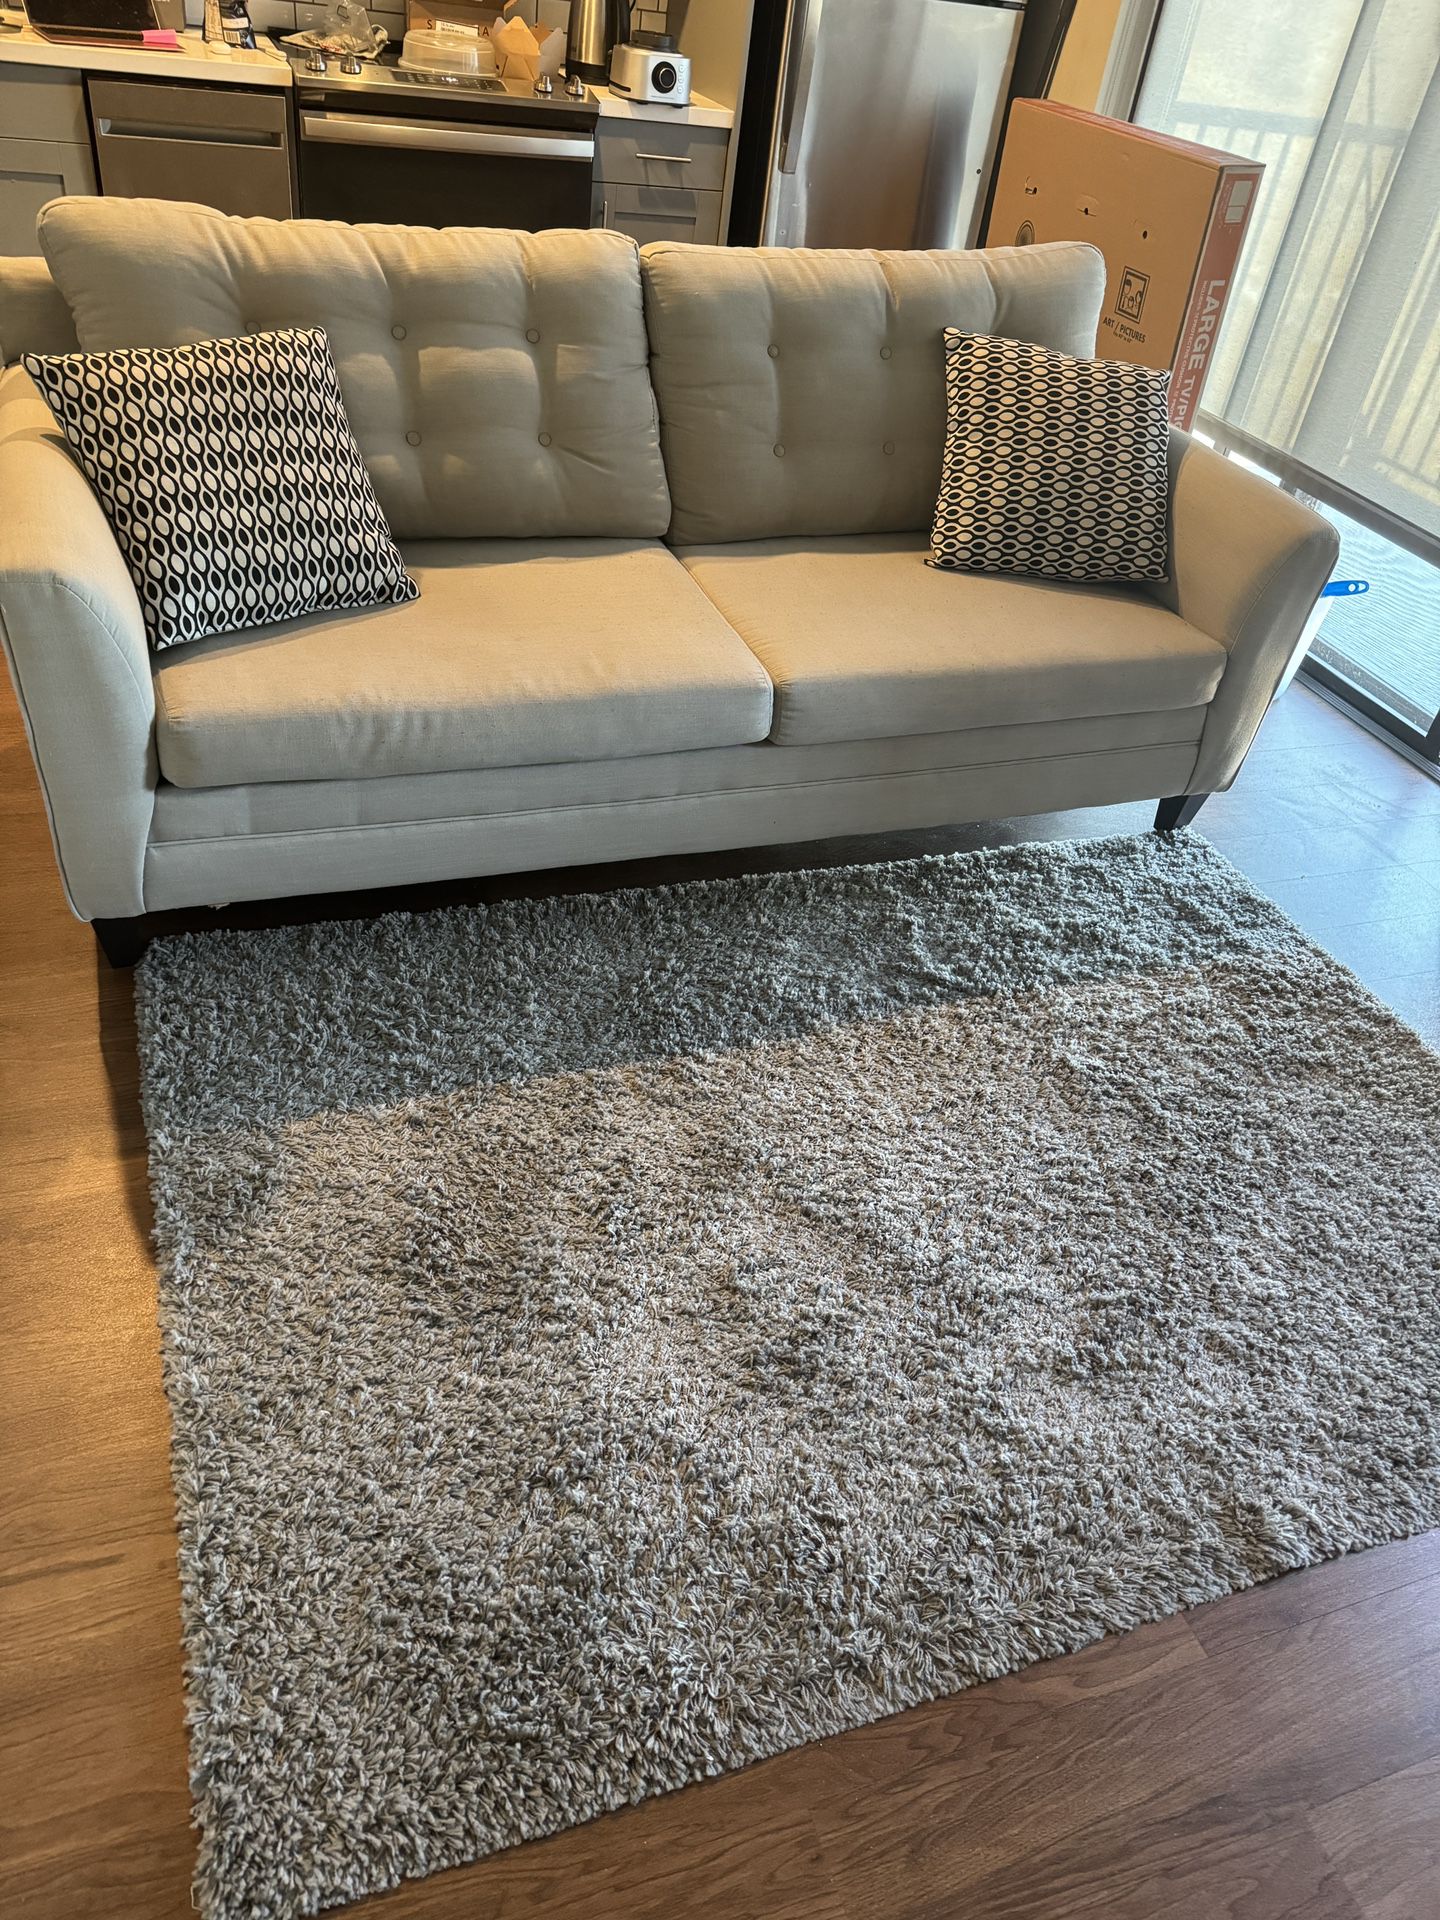 Super light weight Nautical super comfortable 3 seater couch paired with a 5by 7ft gray rug.